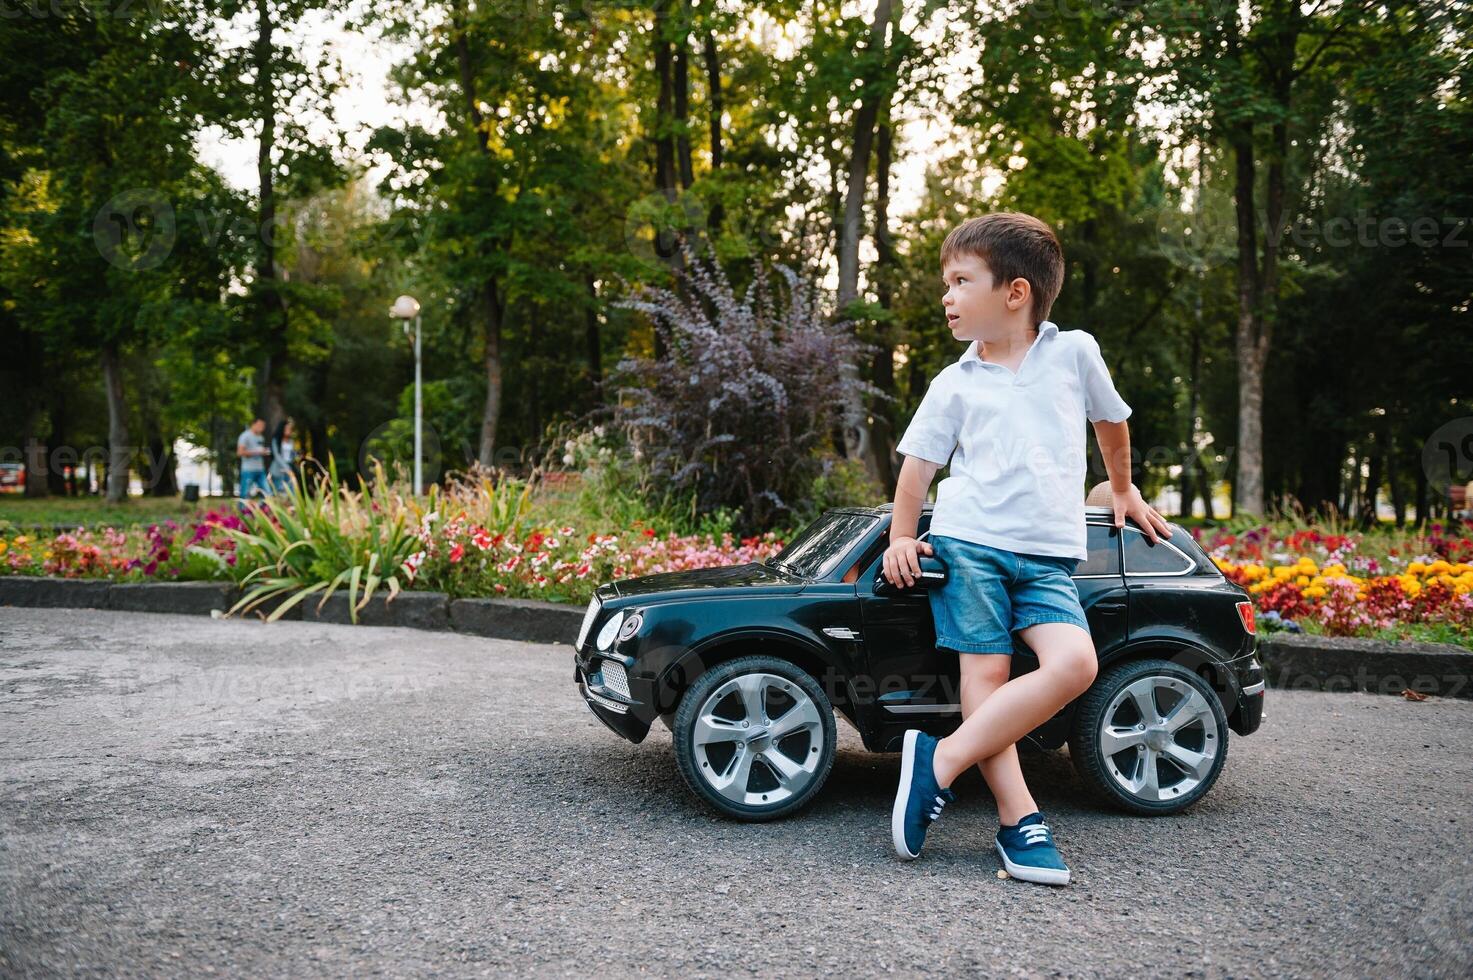 Cute boy in riding a black electric car in the park. Funny boy rides on a toy electric car. Copy space. photo